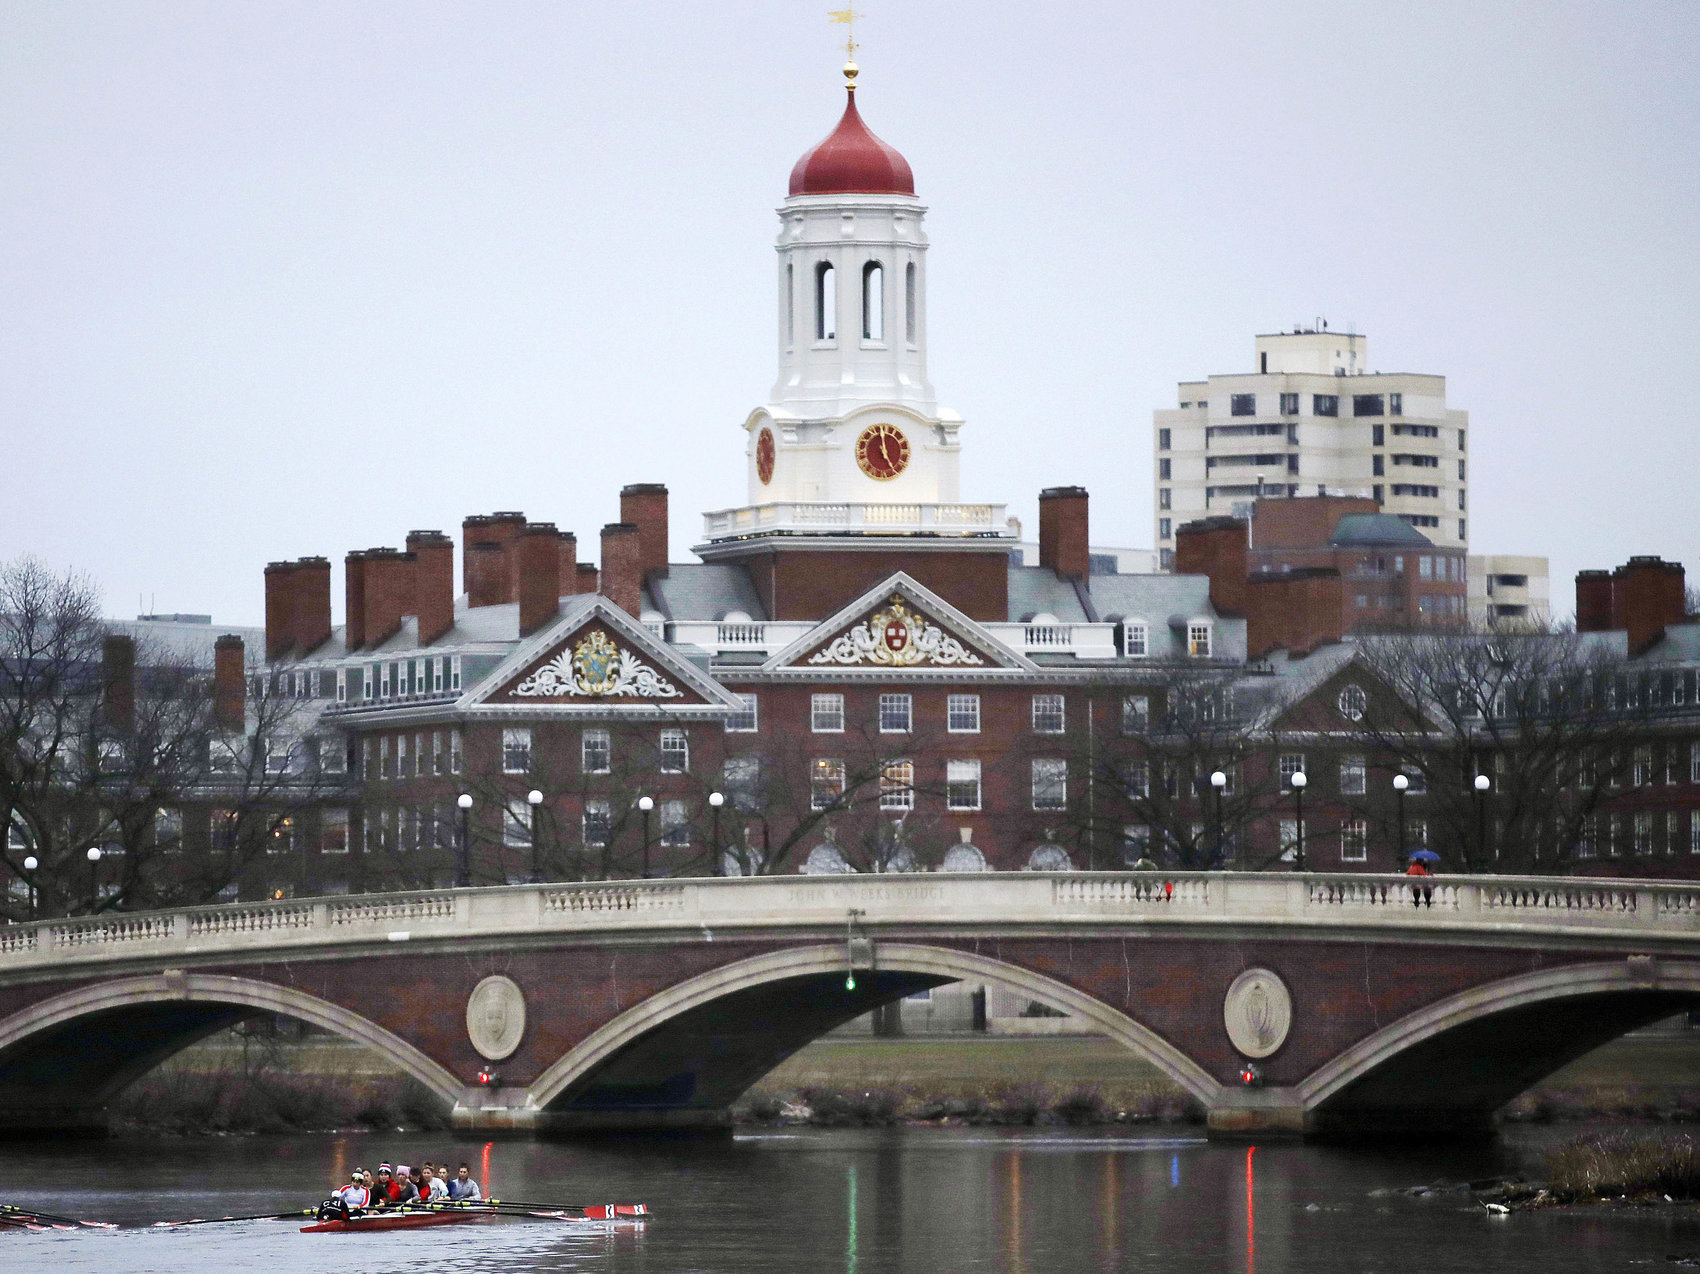 You Can’t Hit Unsend: How A Social Media Scandal Unfolded At Harvard